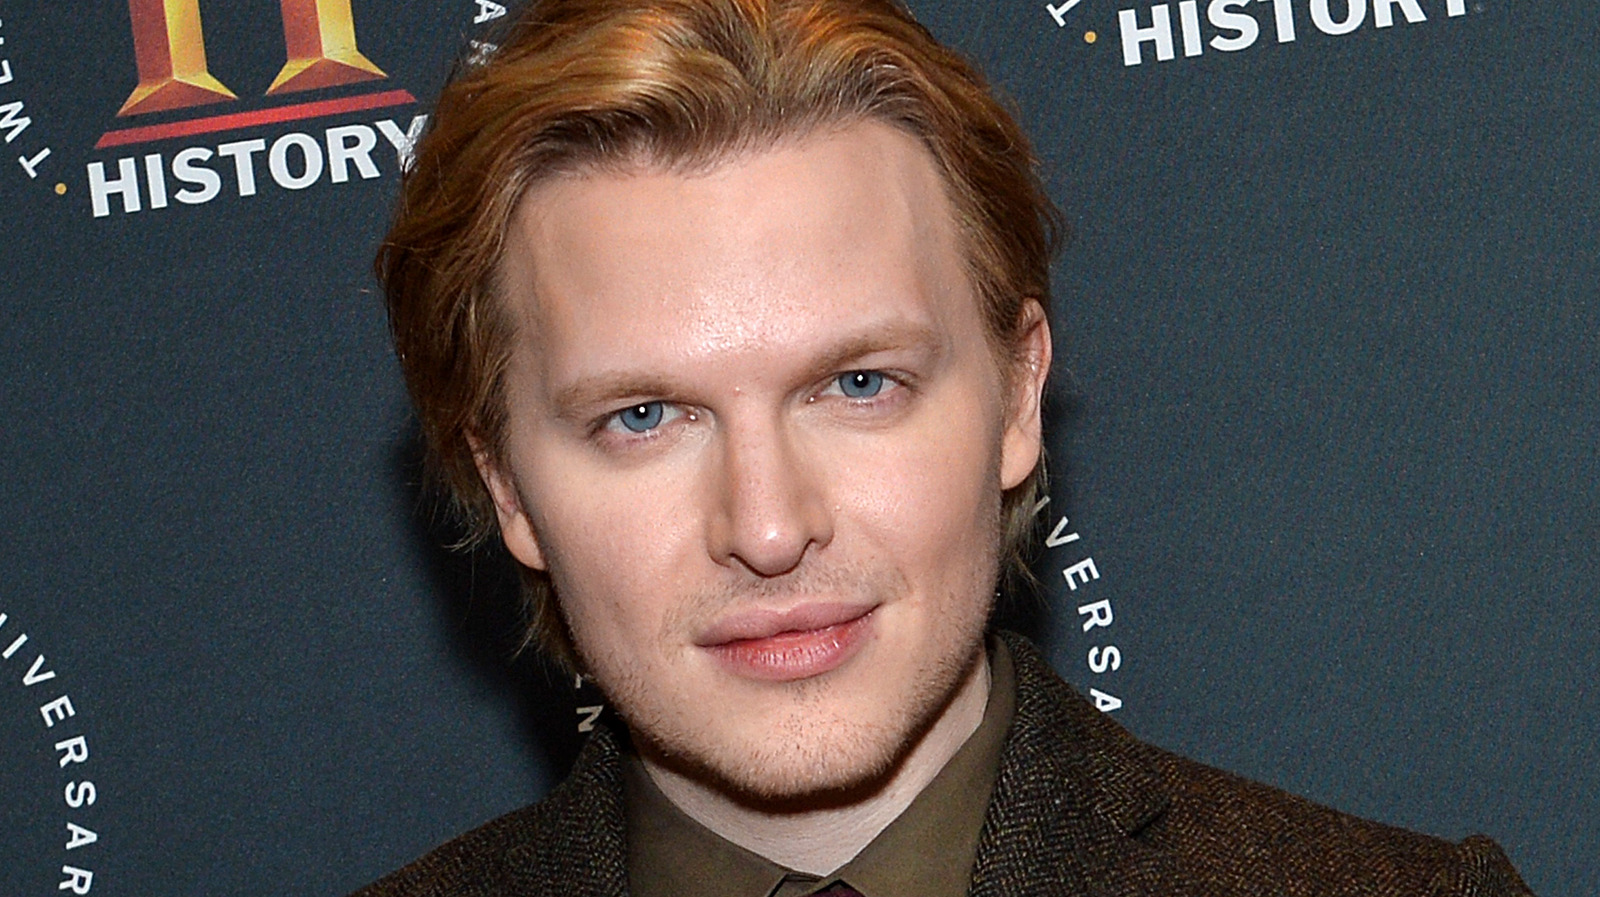 Here's How Much Ronan Farrow Is Worth